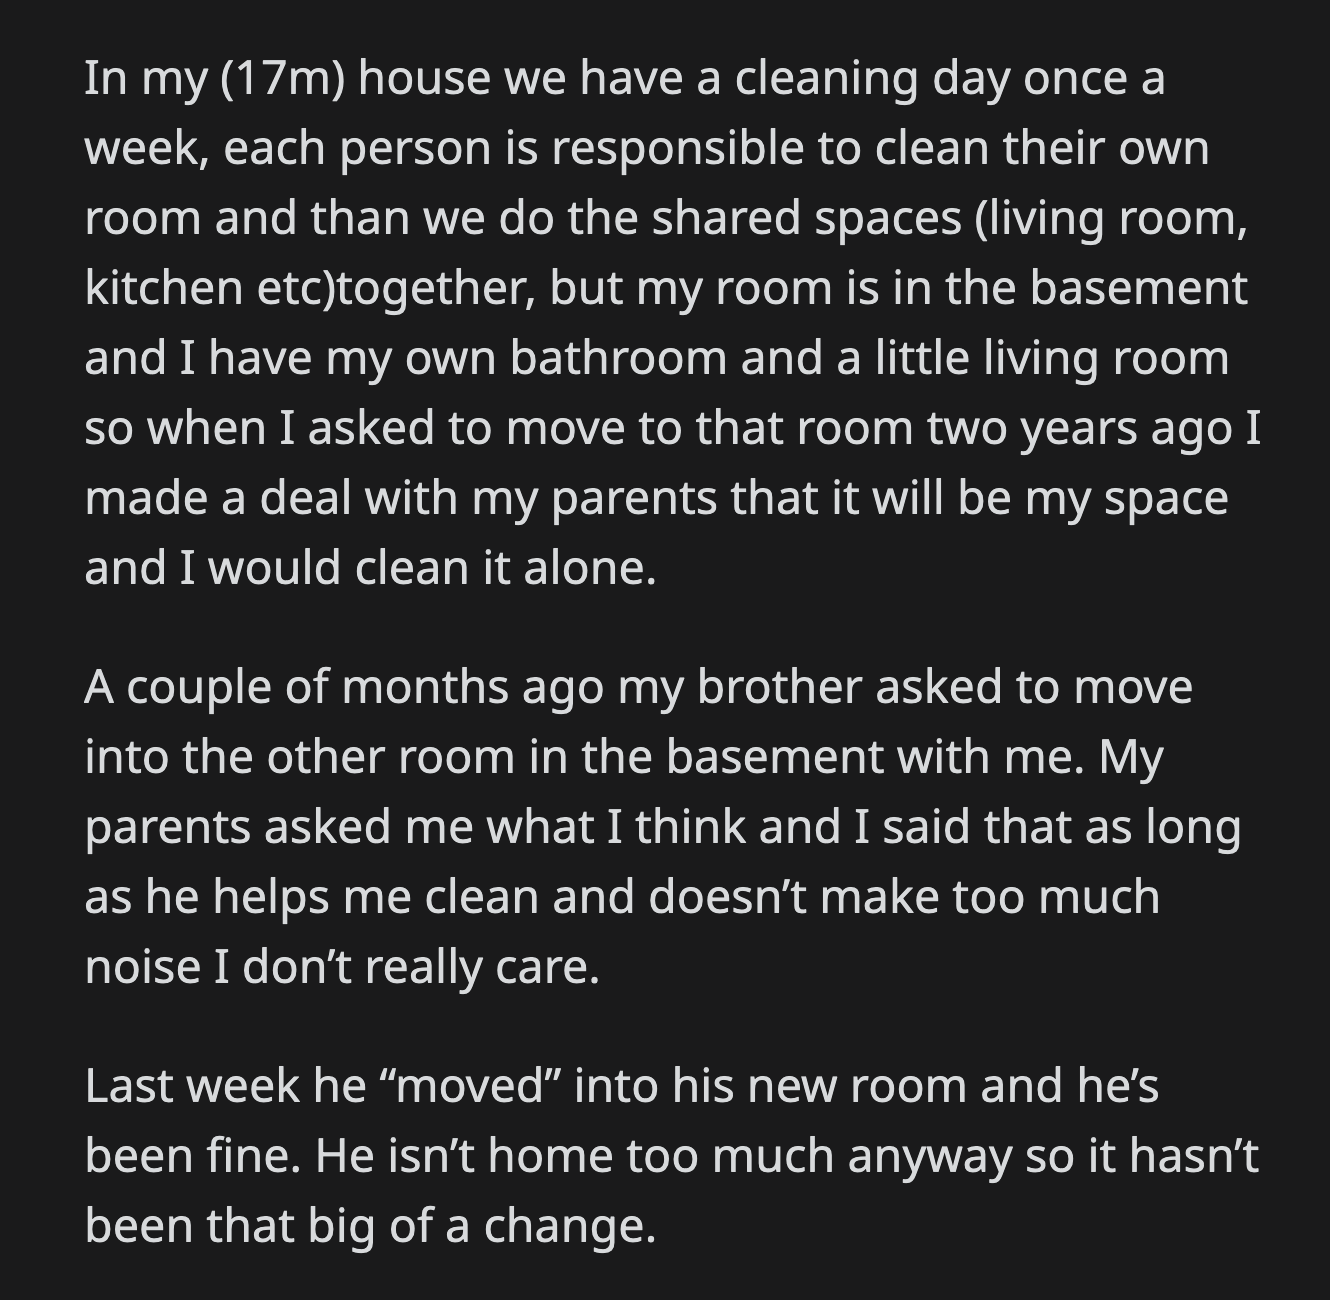 OP decided he couldn't live with his brother. OP moved his brother out of the basement when he left to hang out with his friends.